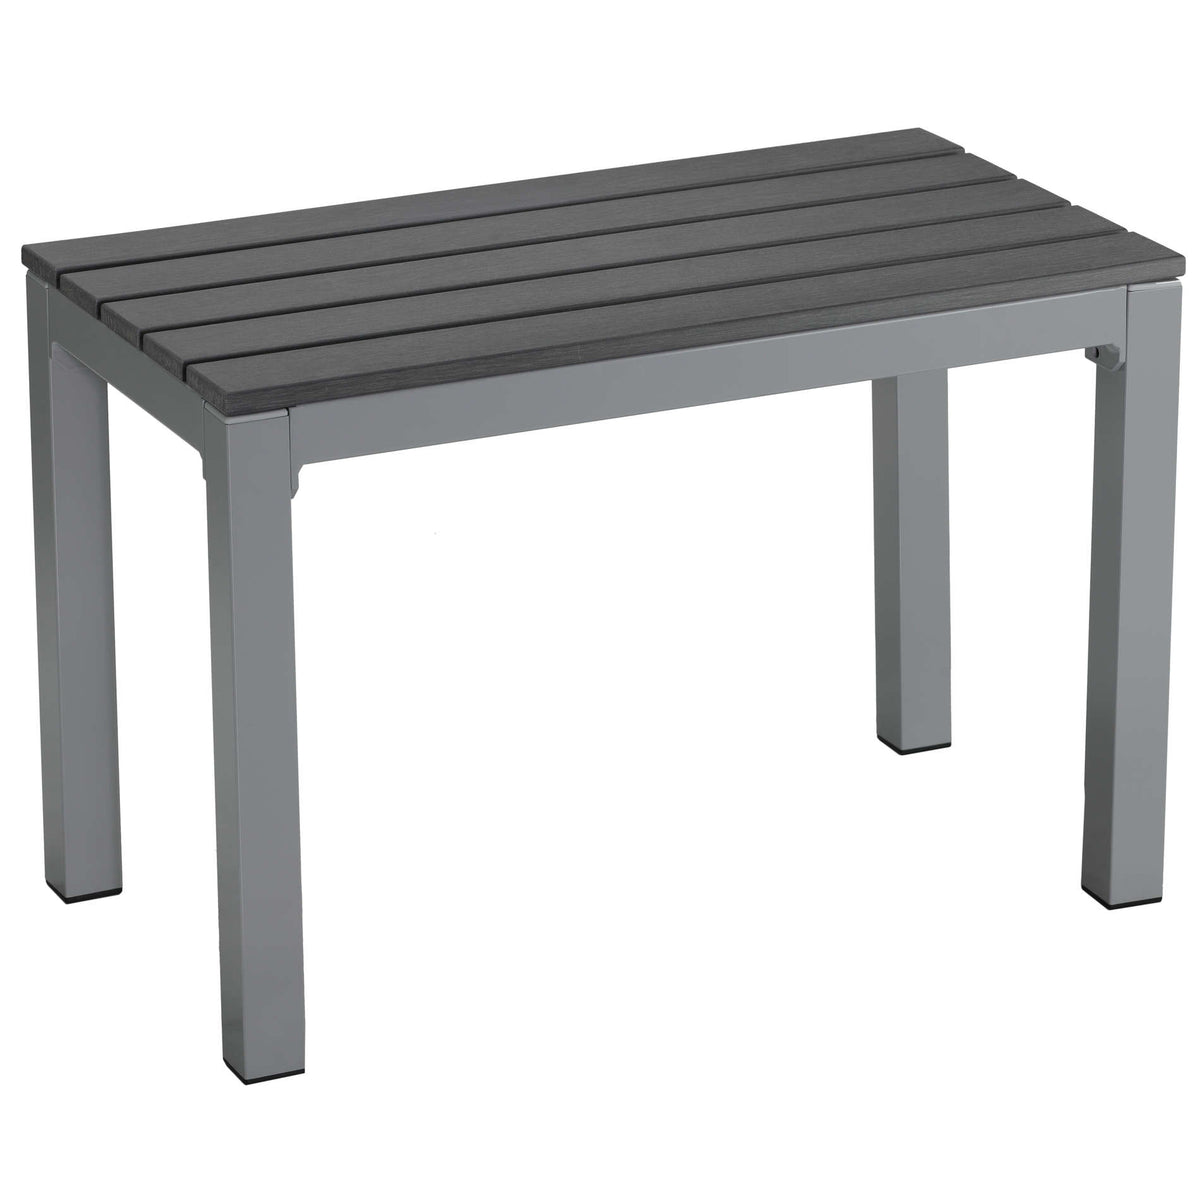 Jaxon Aluminum Outdoor Bench in Poly Resin, Silver/Slate Grey